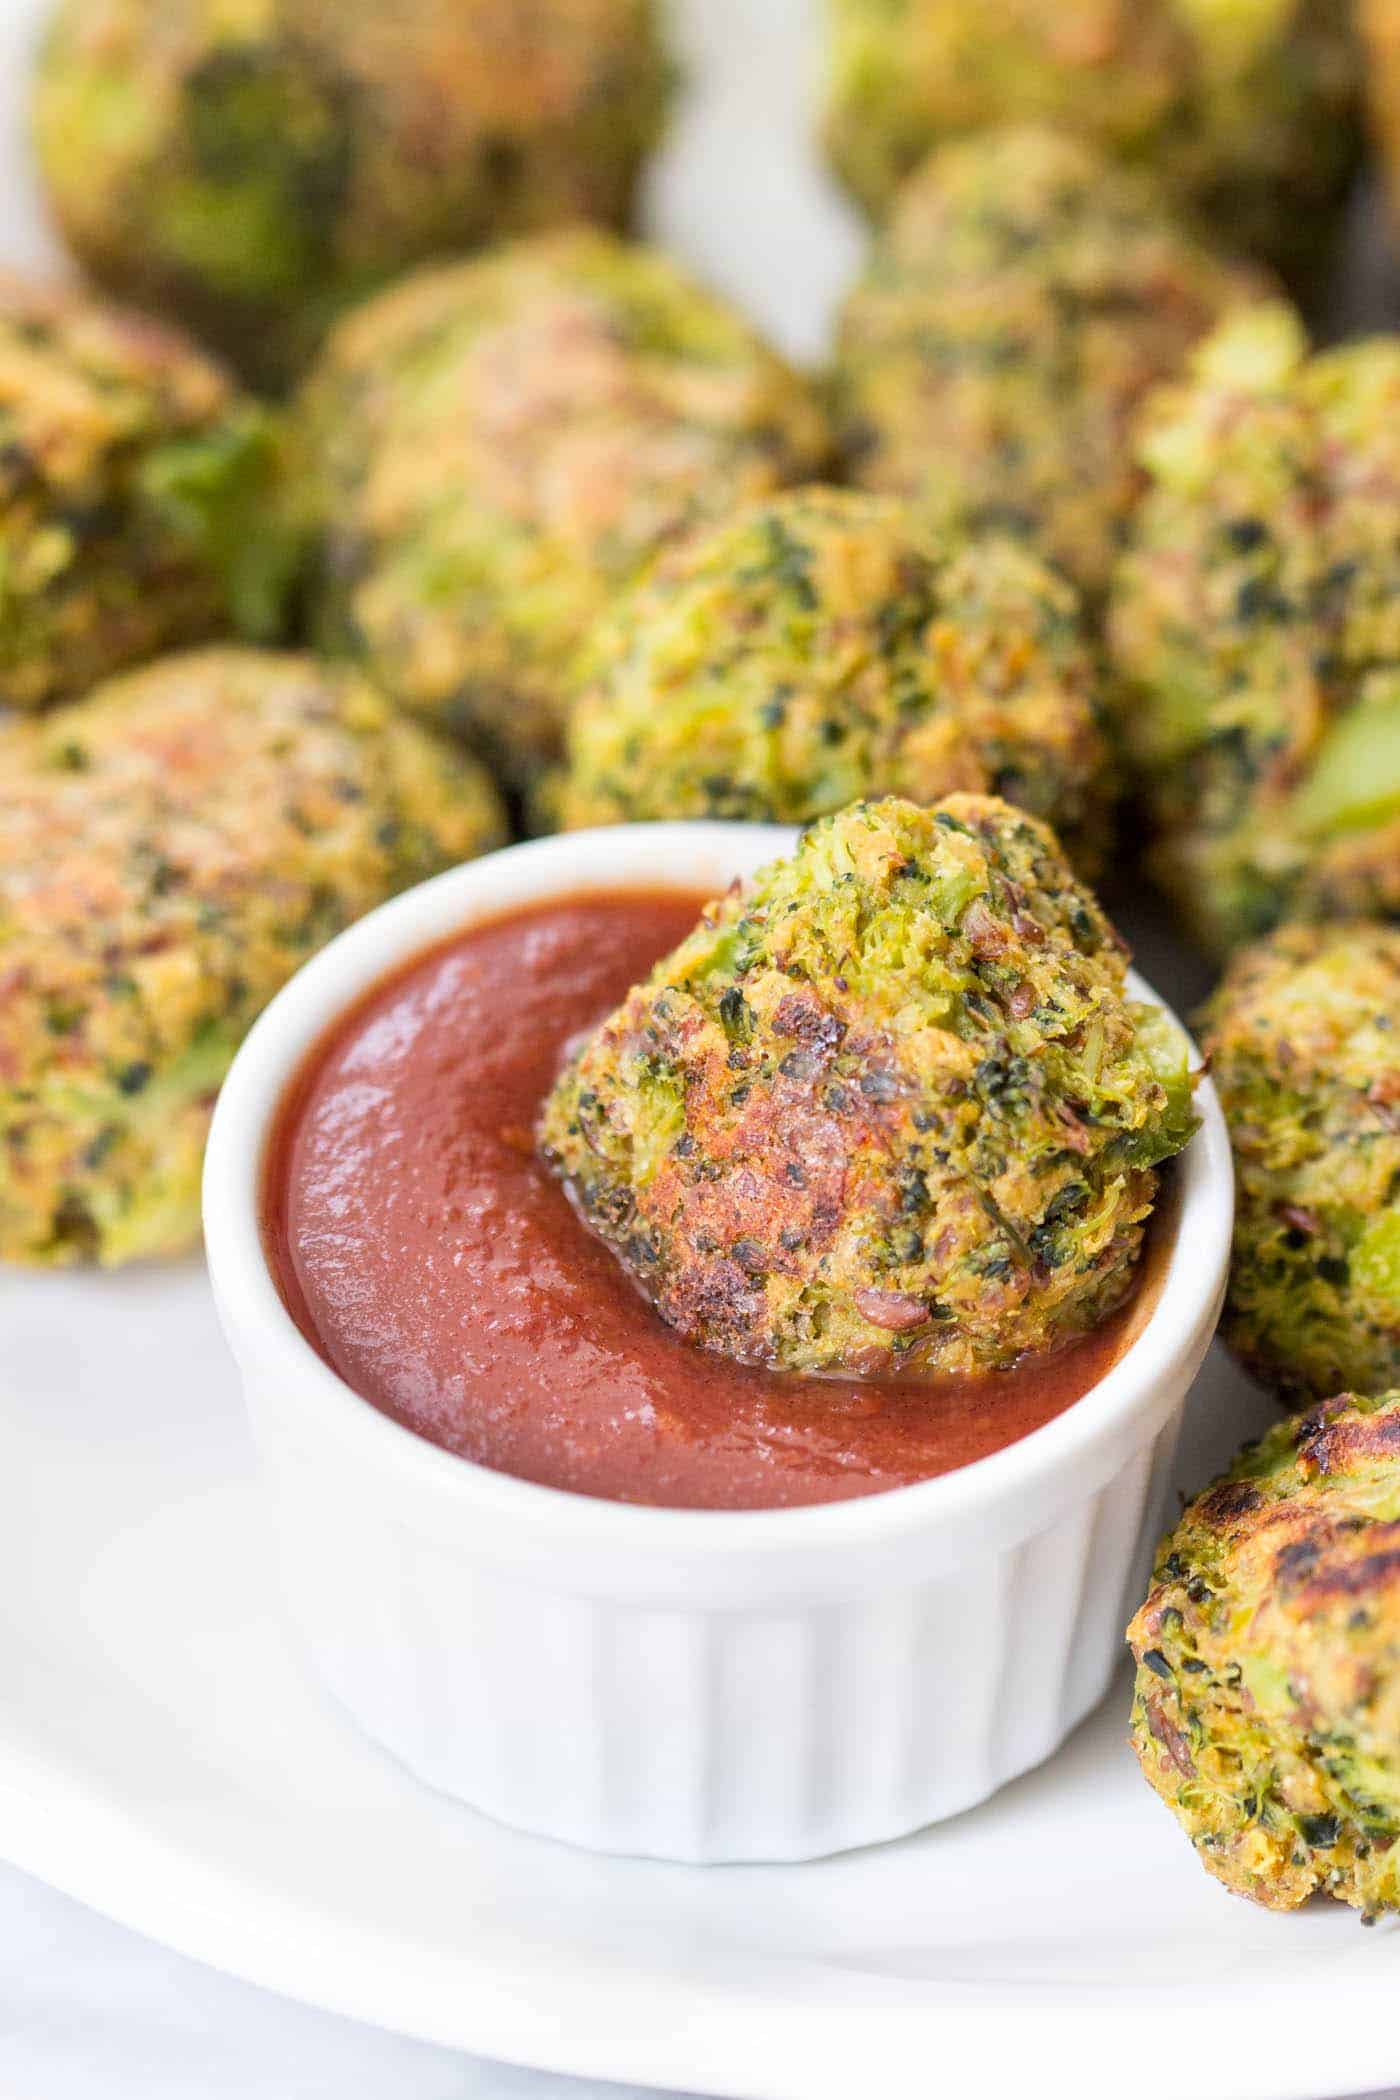 VEGAN QUINOA BROCCOLI TOTS -- with nutritional yeast, quinoa flour and other healthy ingredients!